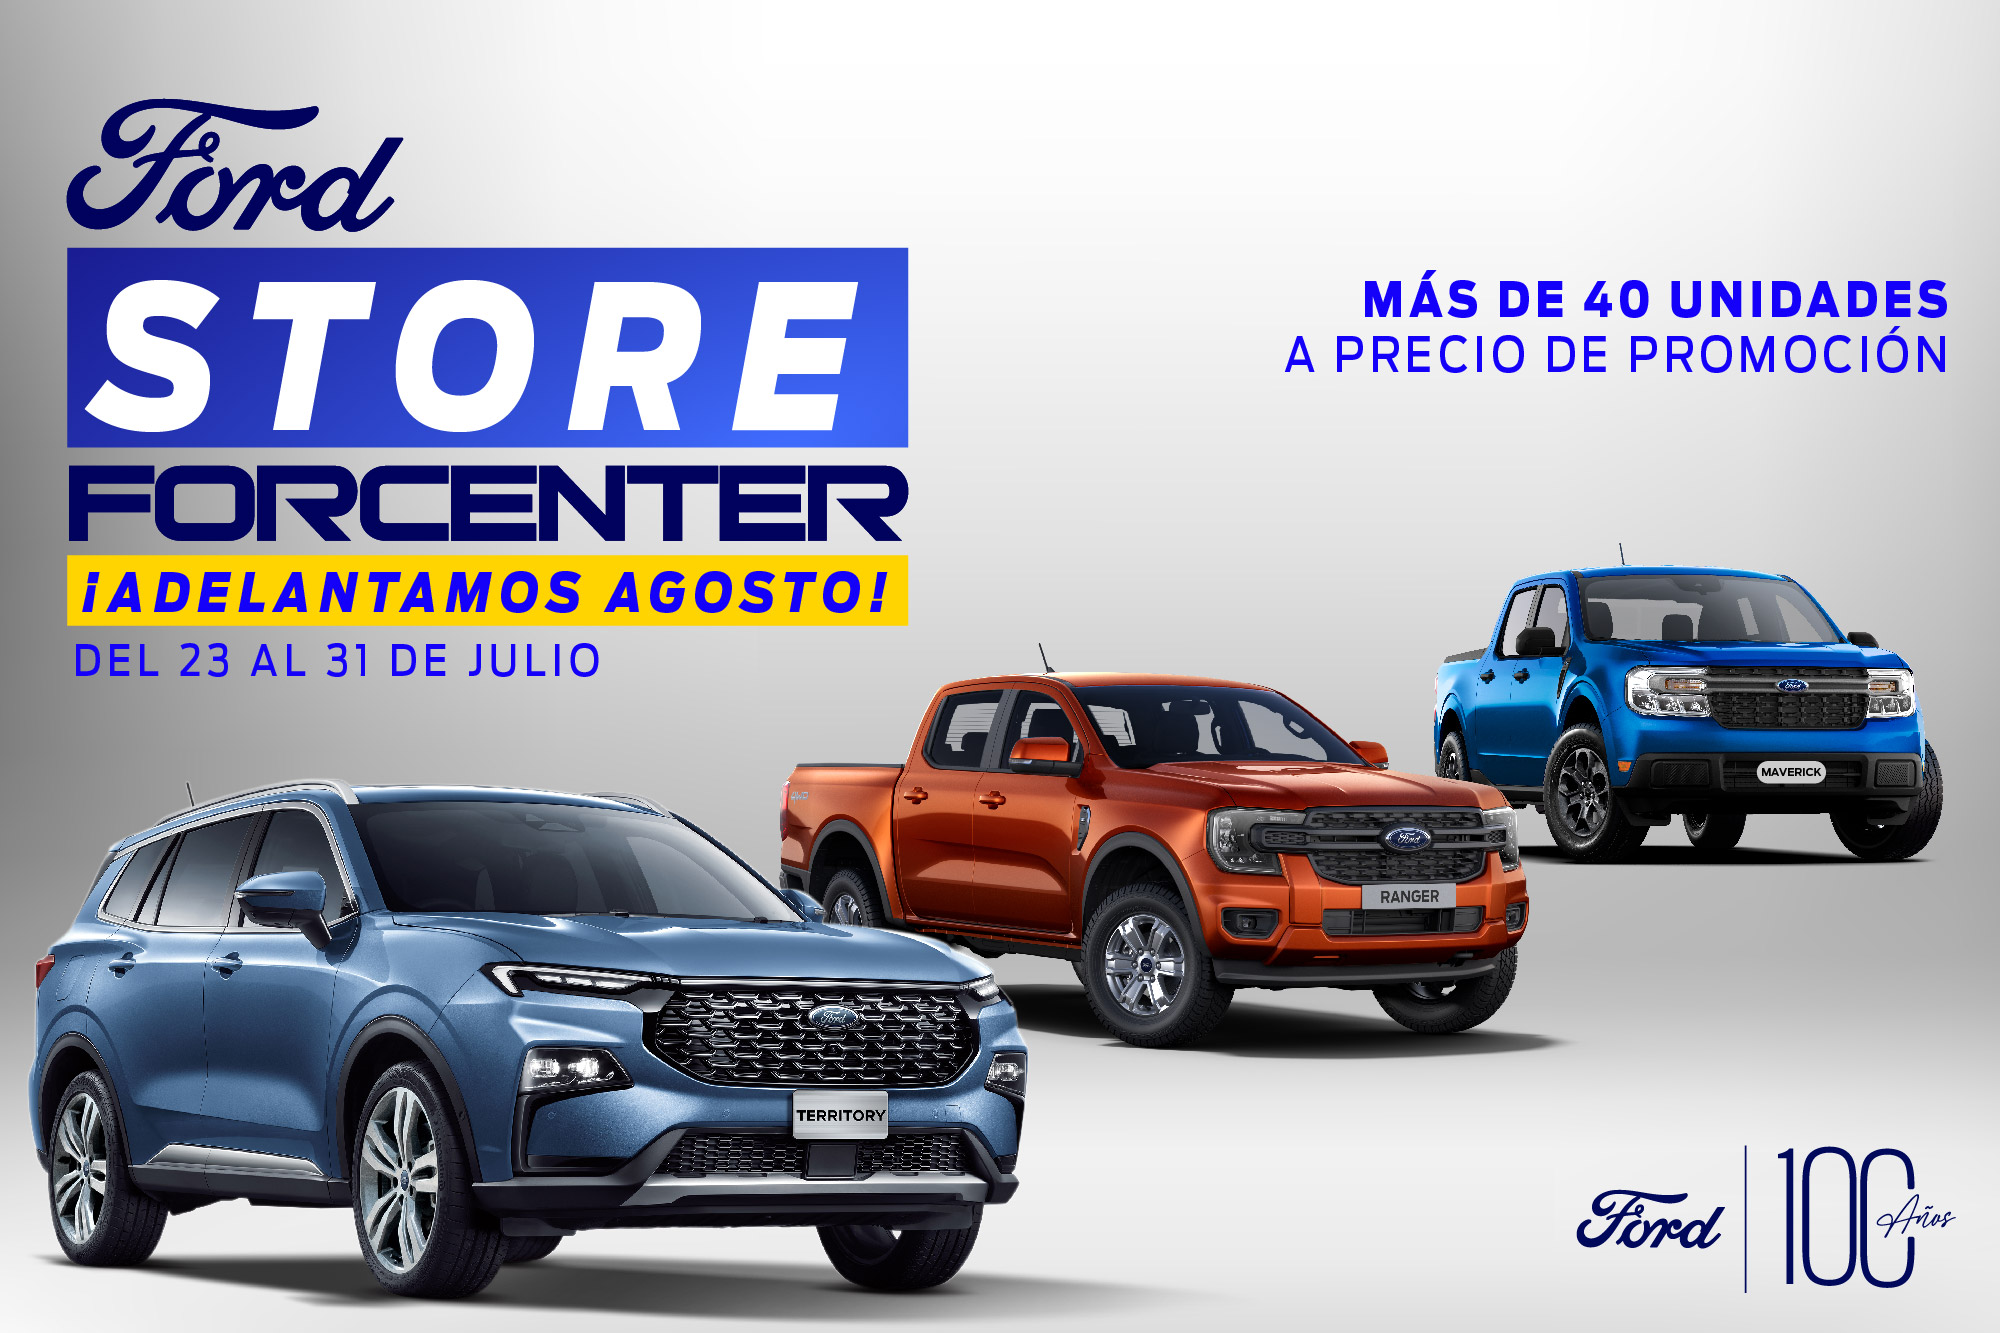 FORD STORE